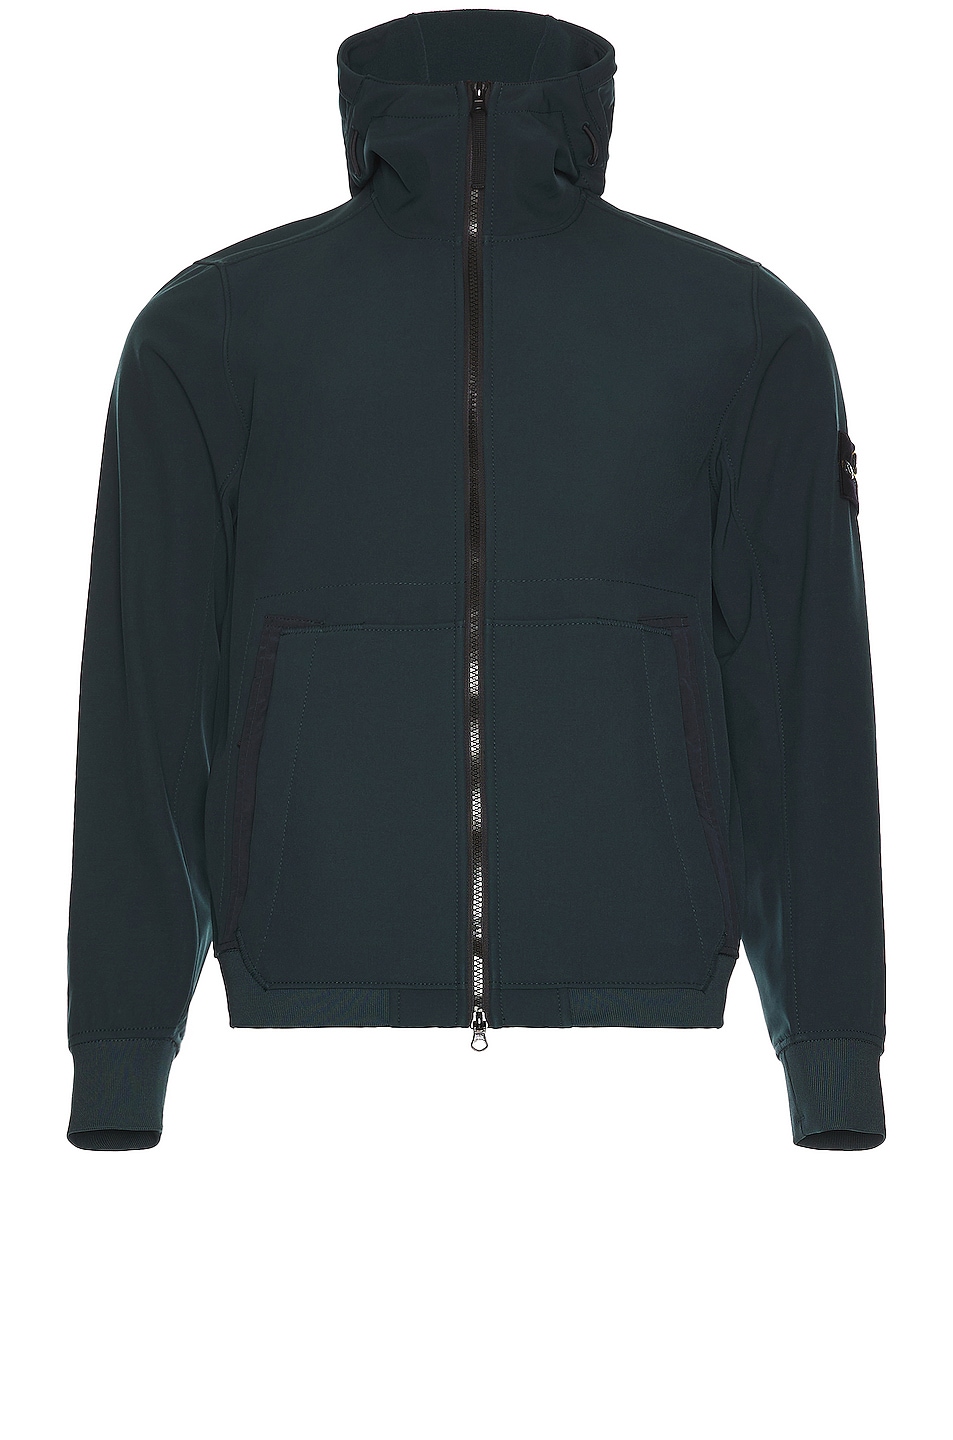 Image 1 of Stone Island Light Outerwear Jacket in Petrol